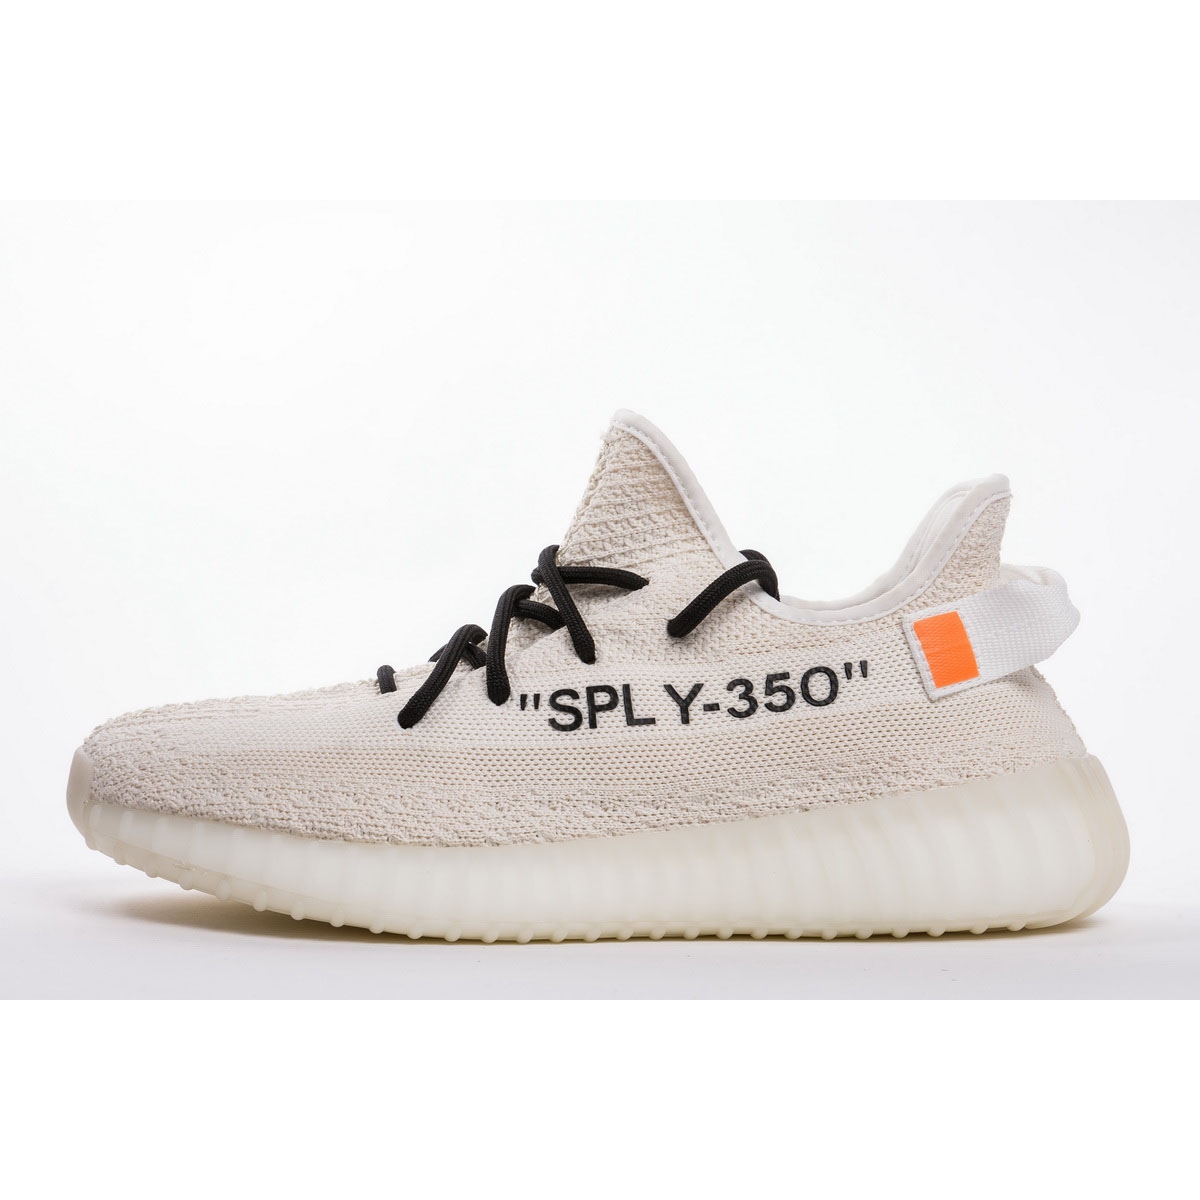 Wolf in sheep's clothing launch Biggest Yeezy 350 Boost V2 OFF White Rice white – PK-Shoes